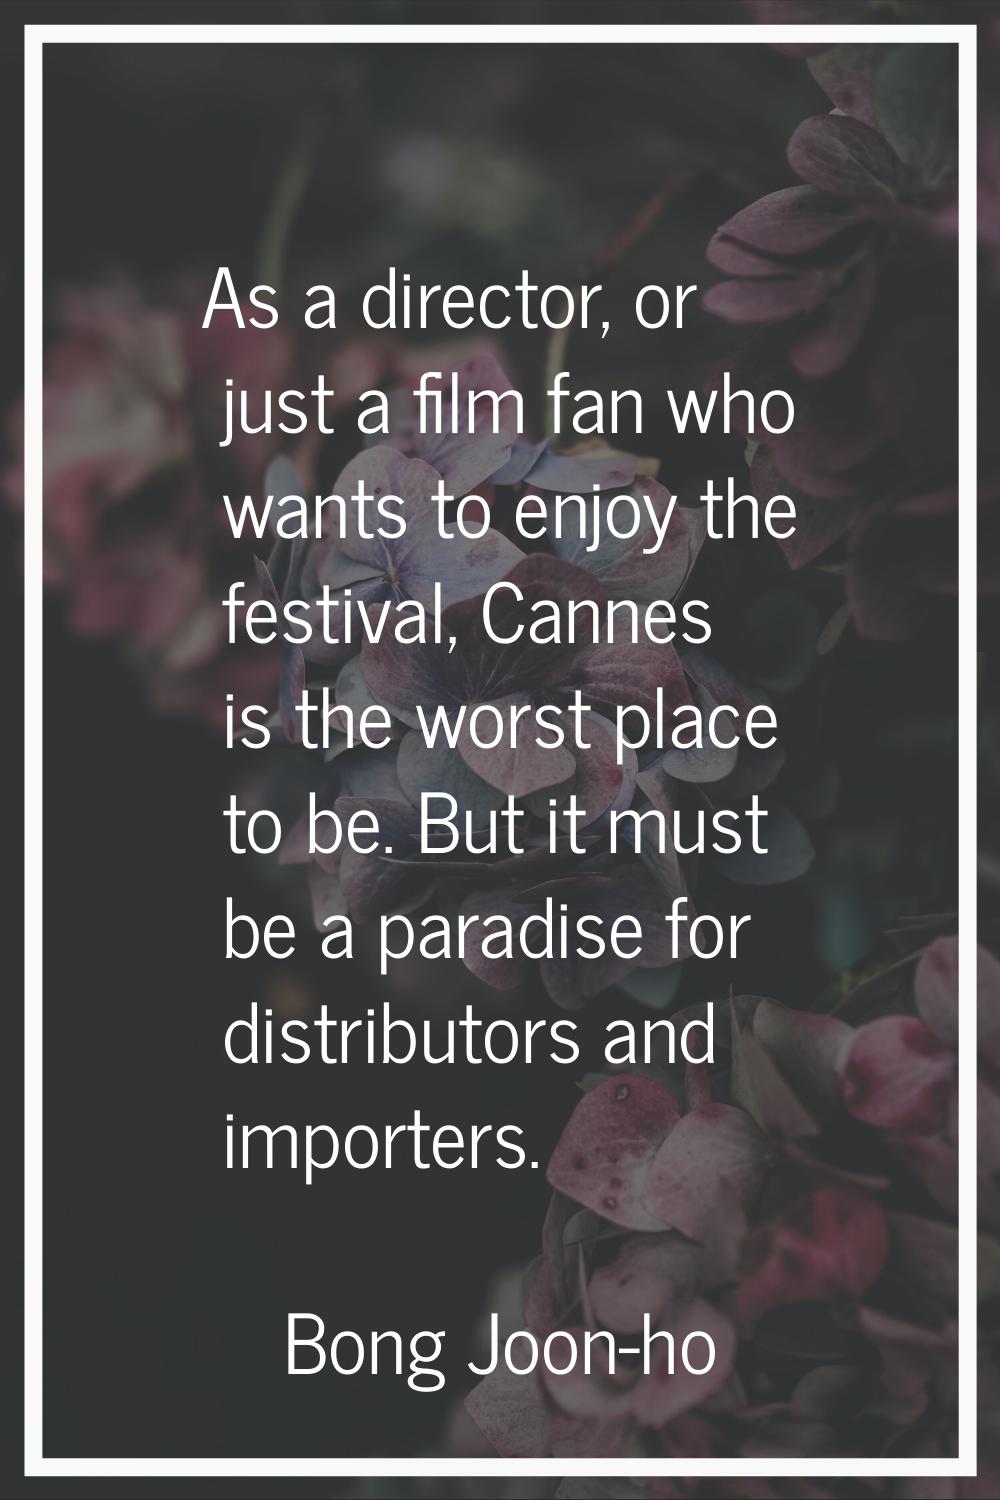 As a director, or just a film fan who wants to enjoy the festival, Cannes is the worst place to be.